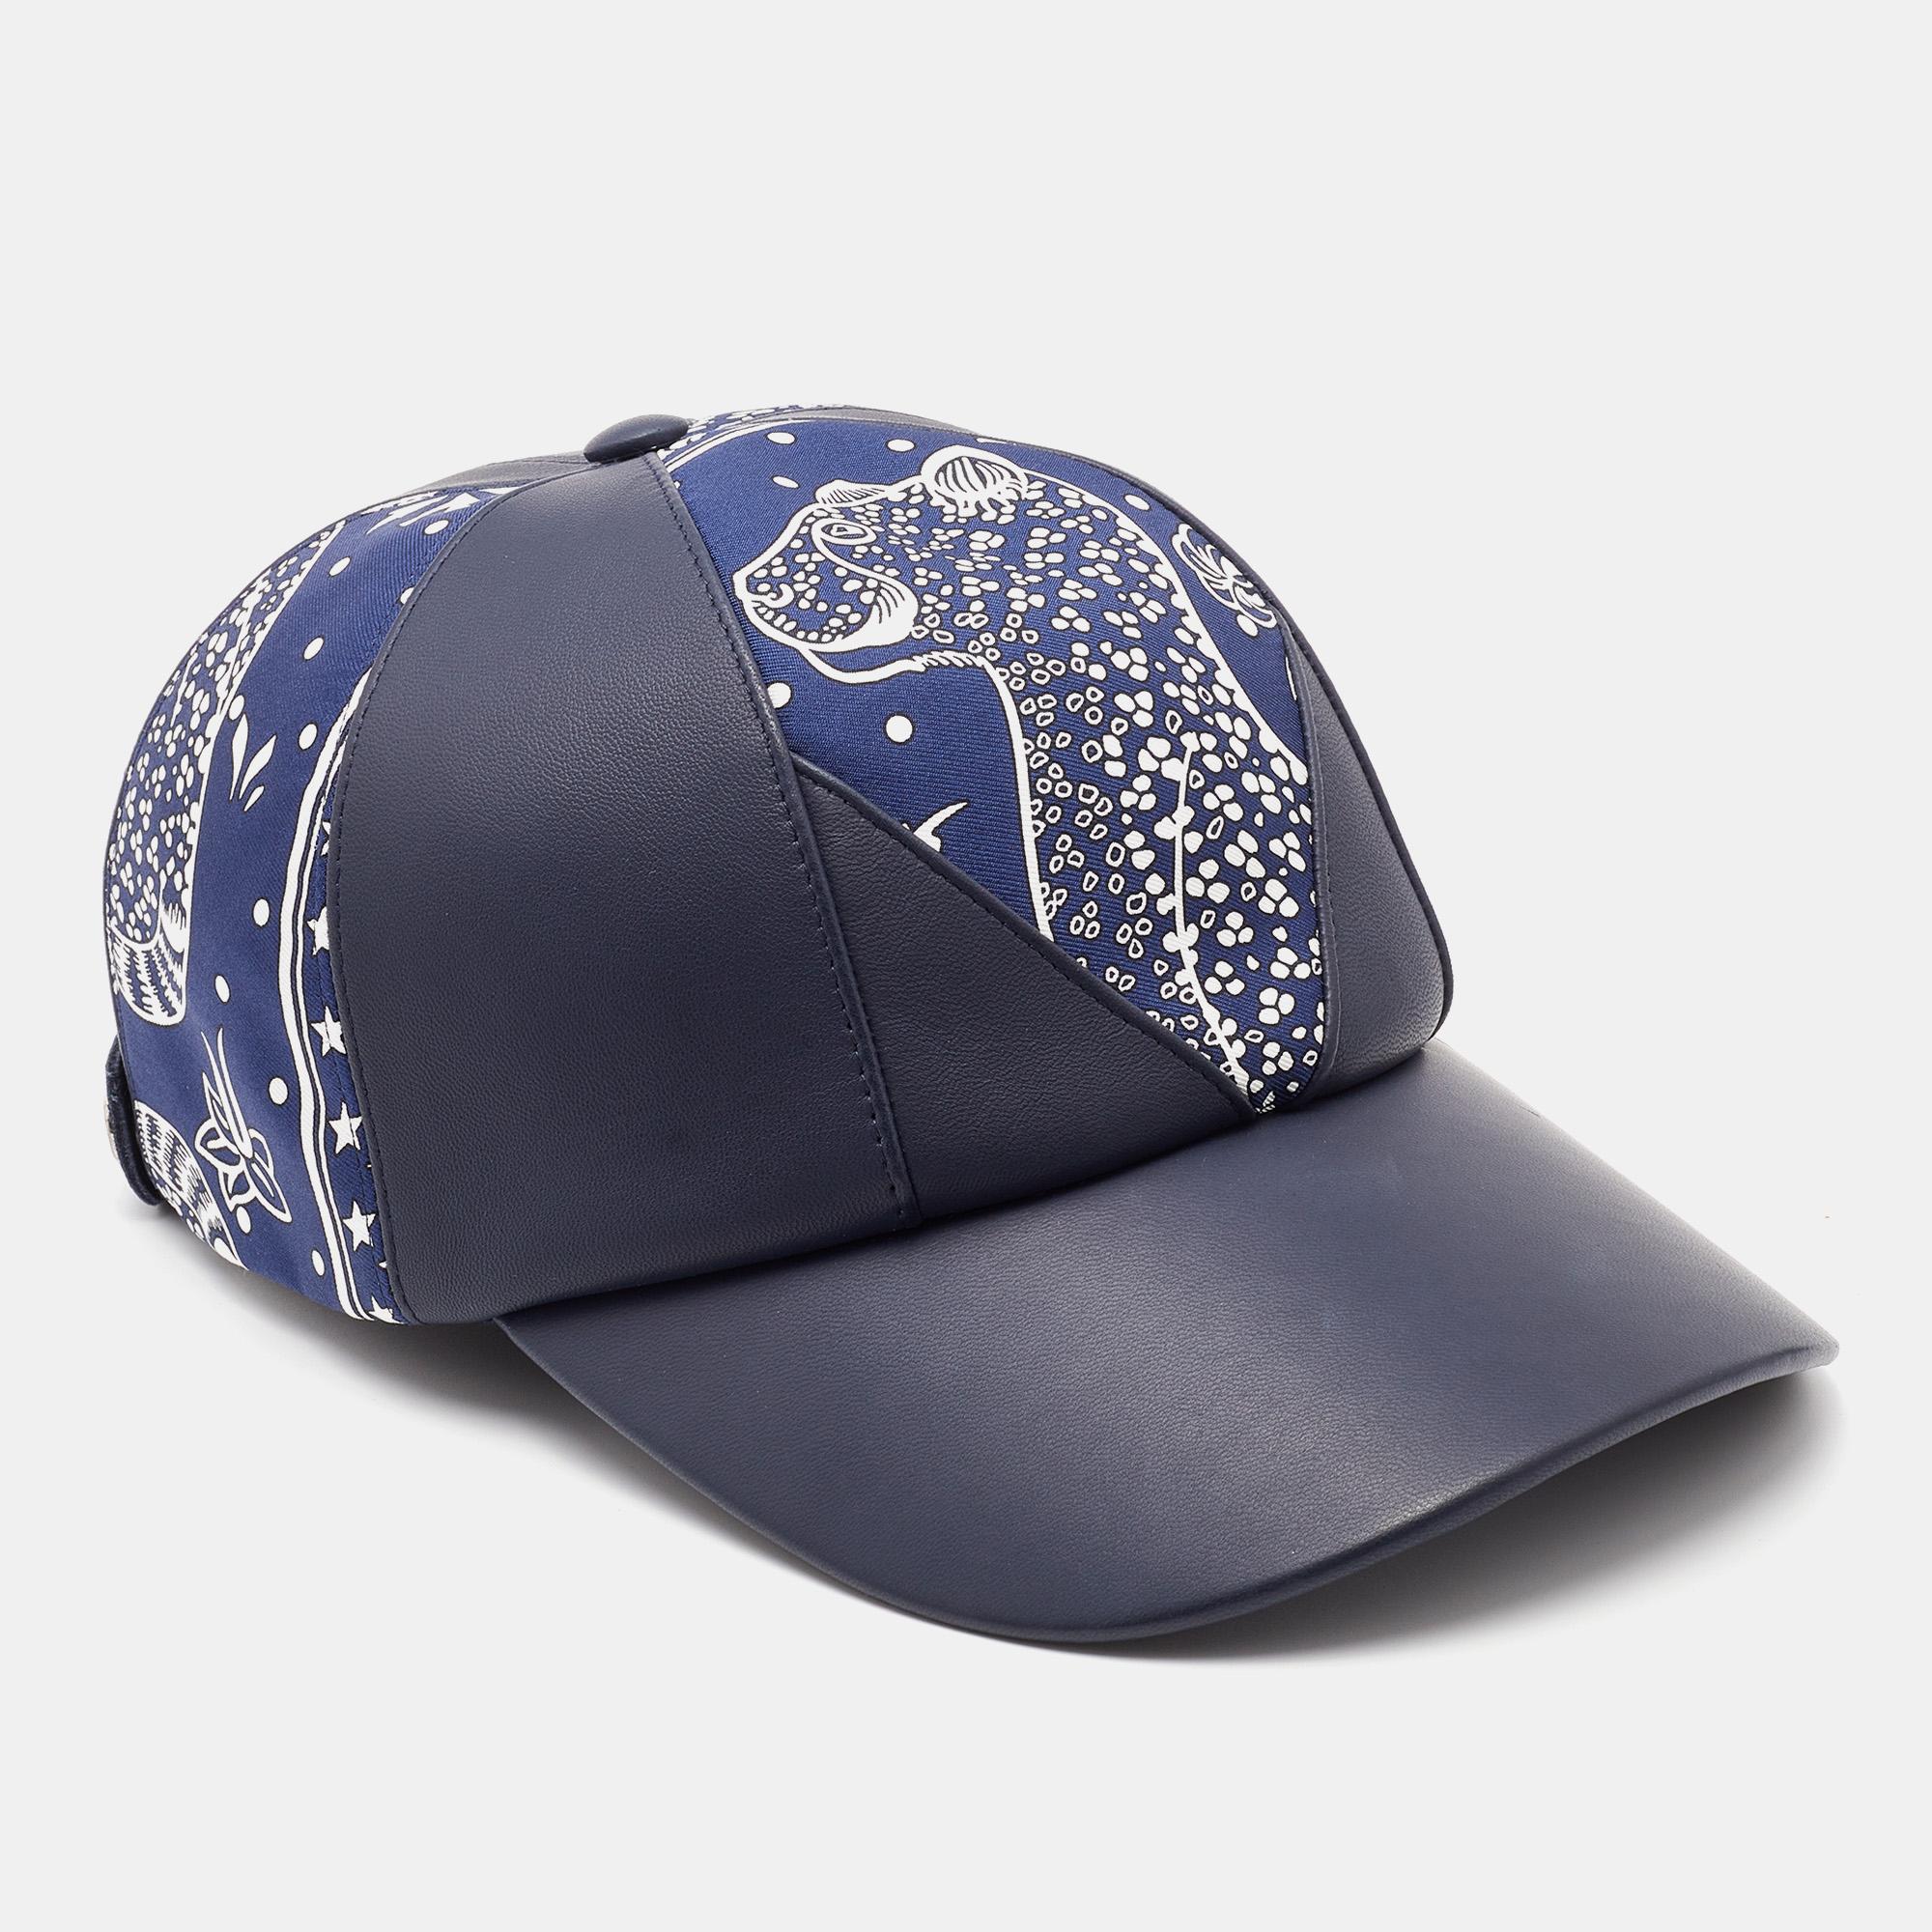 This fashionable update to the classic baseball cap is made from quality materials and features a navy blue shade. It has the Thelma Les Leopards design on the front and an adjustable fit.

